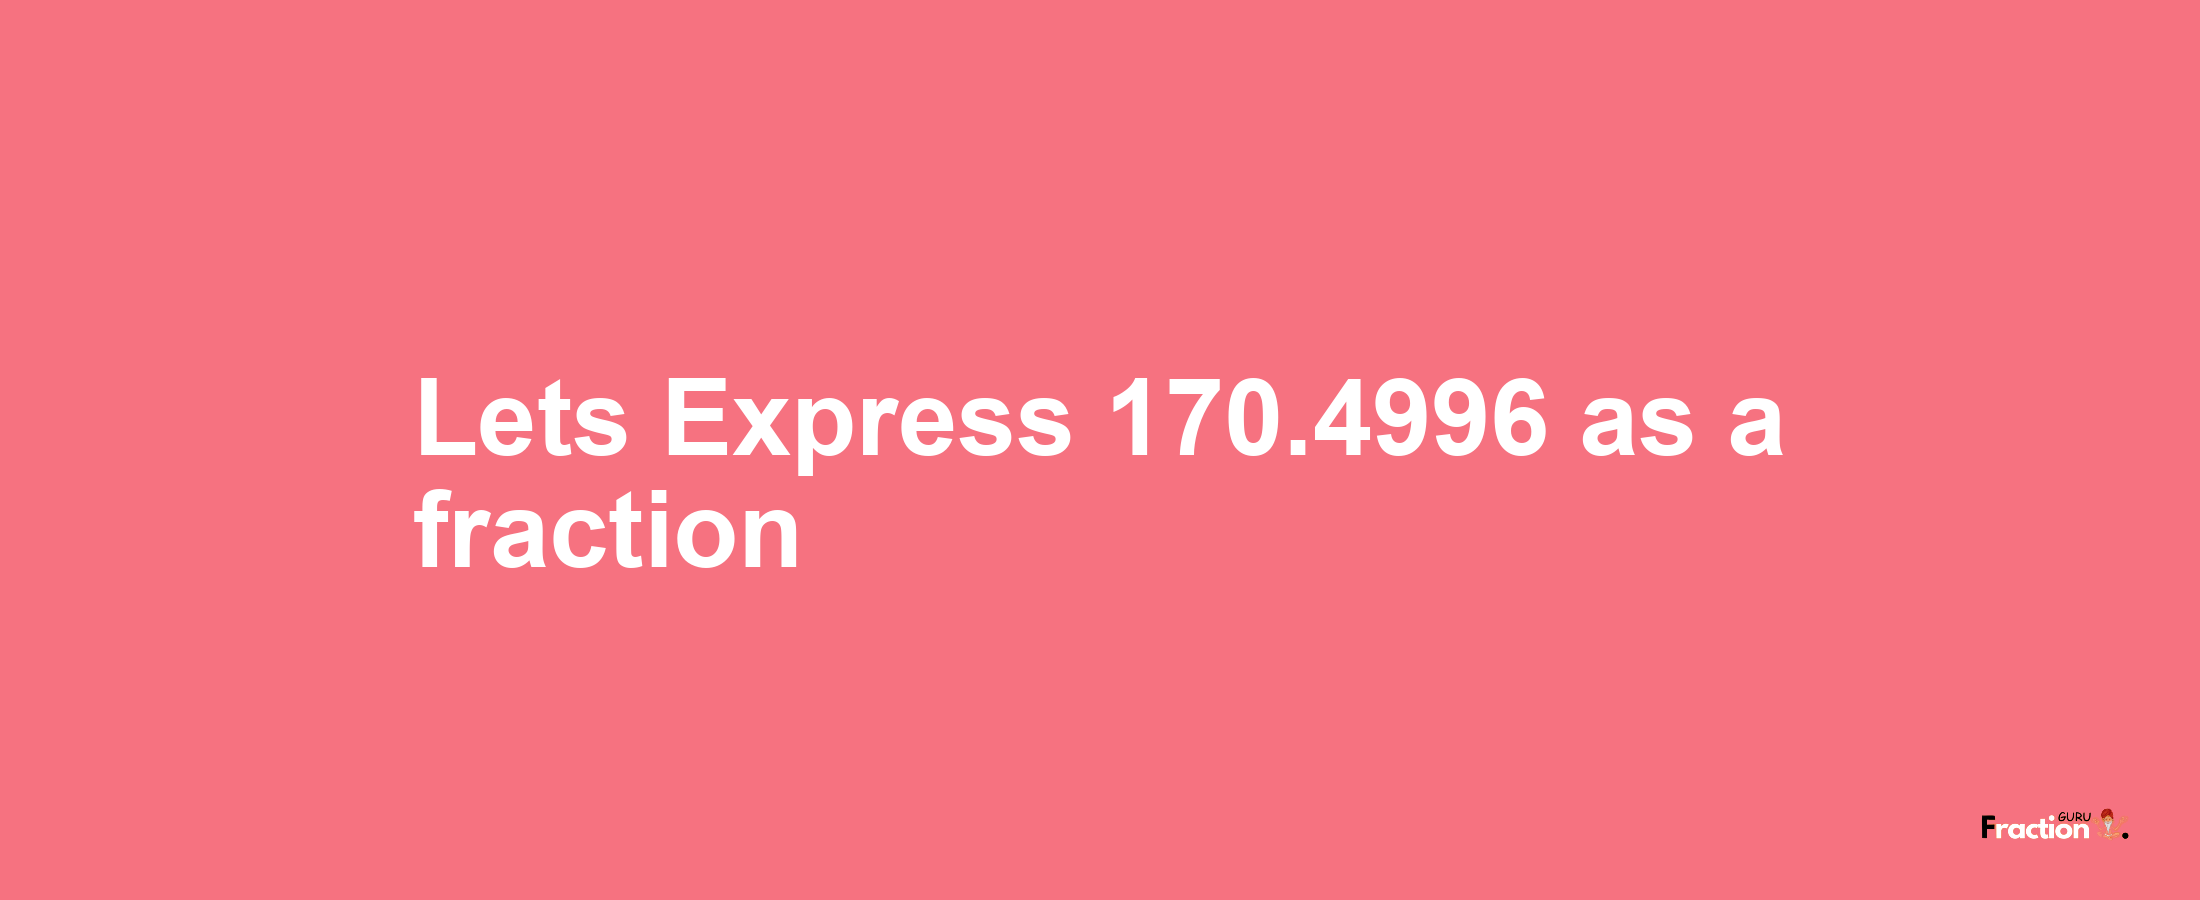 Lets Express 170.4996 as afraction